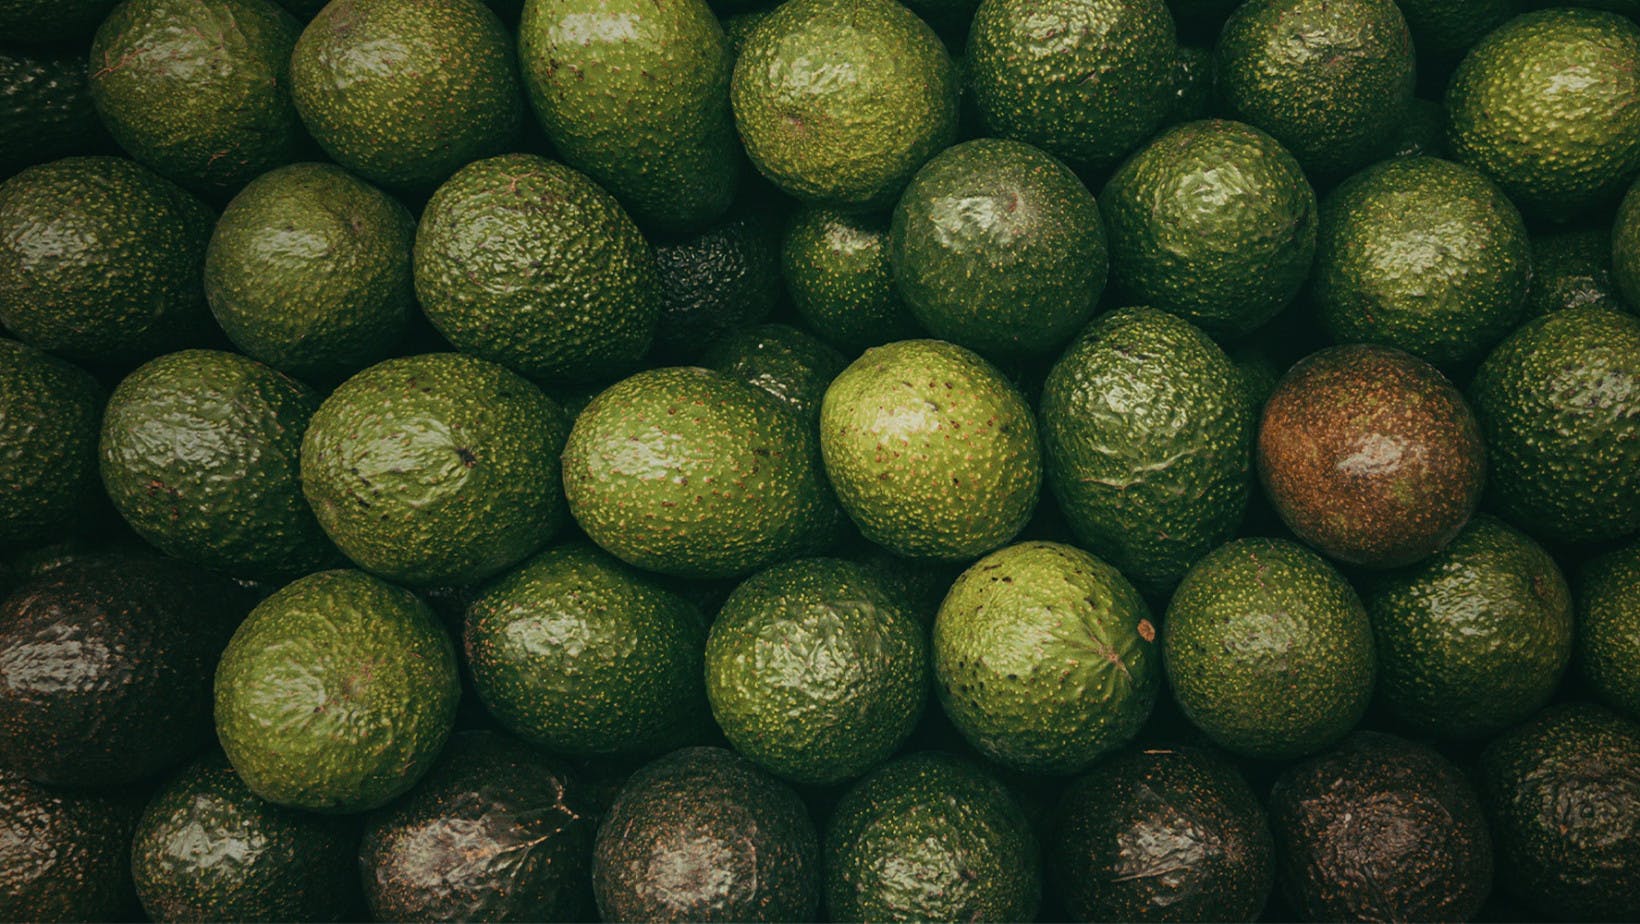 Closeup overhead view of several rows of avocados, which are a demanded product in a store